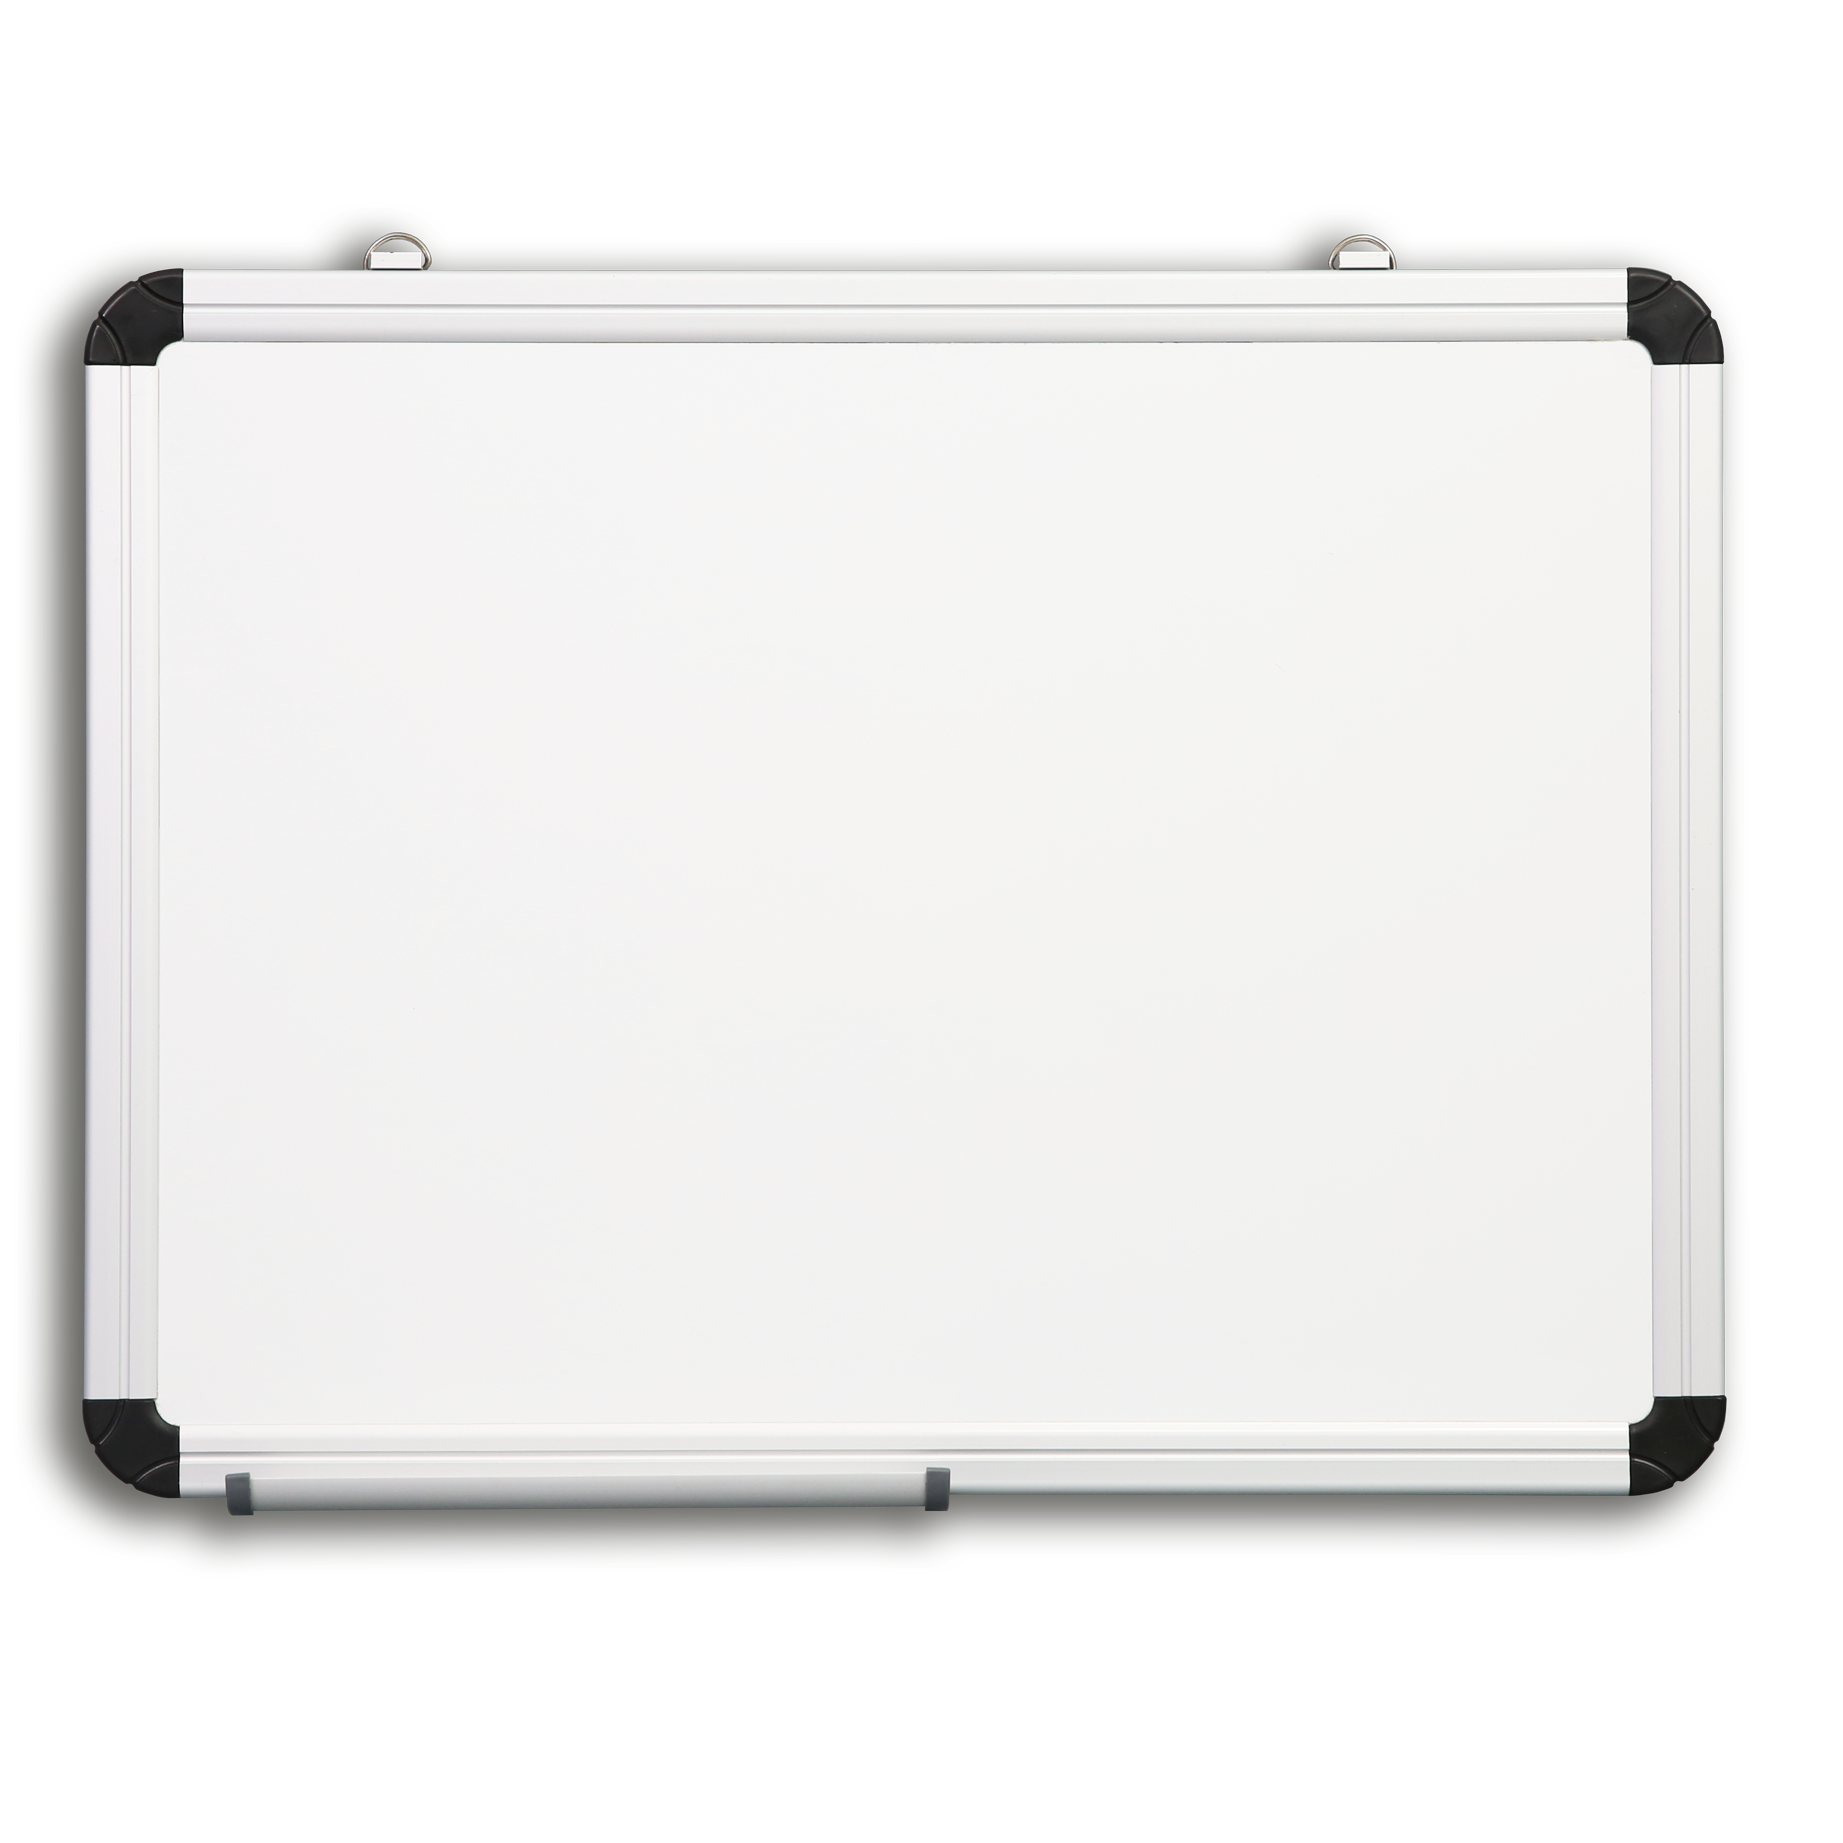 Factory Customize Office Standard Whiteboard Hanging Wall Magnetic White Board Dry Erase Writing Board for Kids